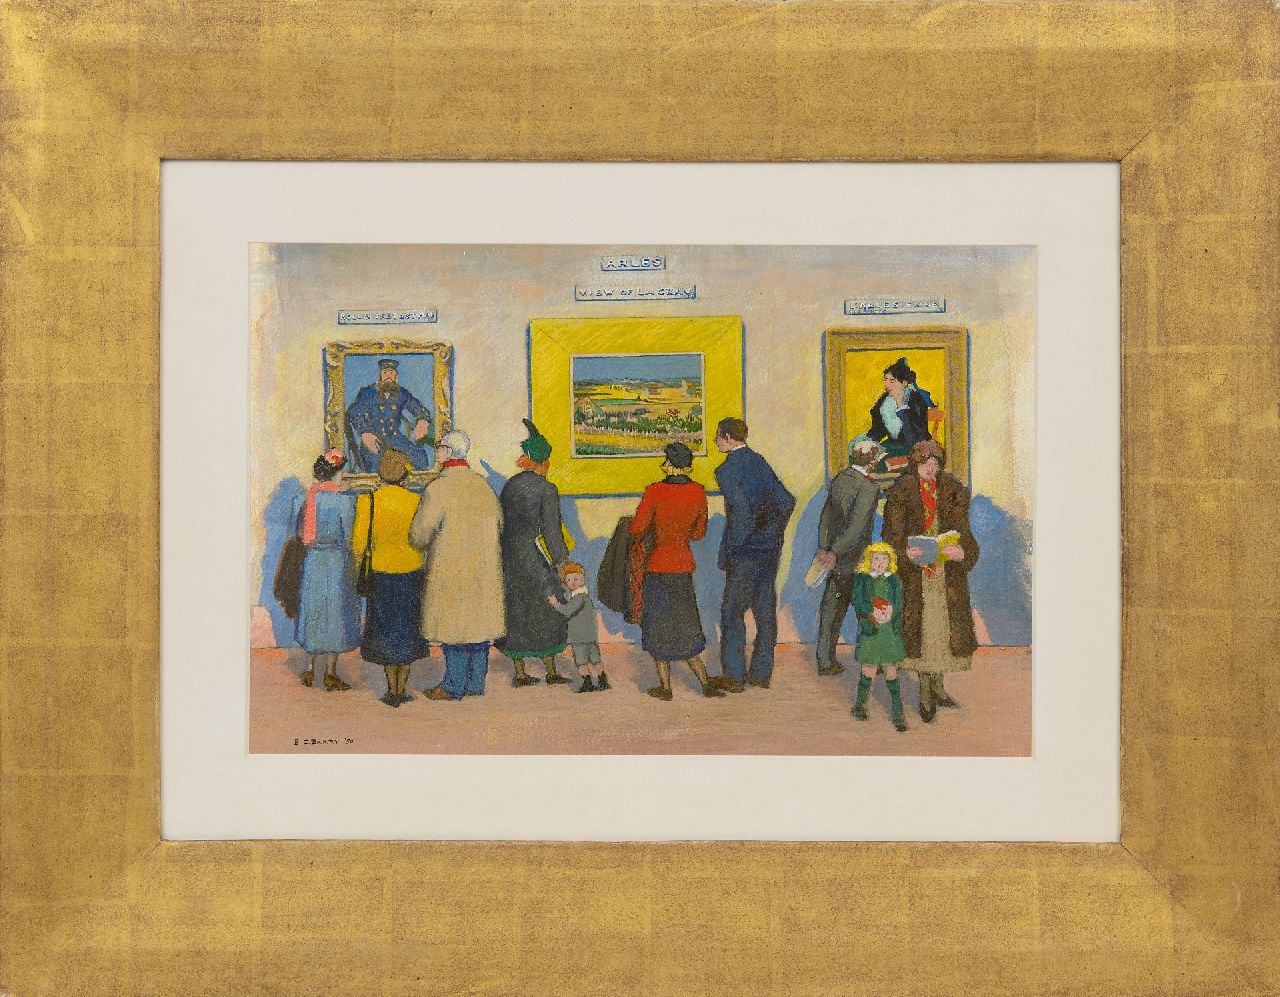 Barry E.C.  | Edith Cleaves Barry, Van Gogh at the 'Met', 1950, gouache and oil on paper 30.0 x 41.3 cm, signed l.l. and dated '50